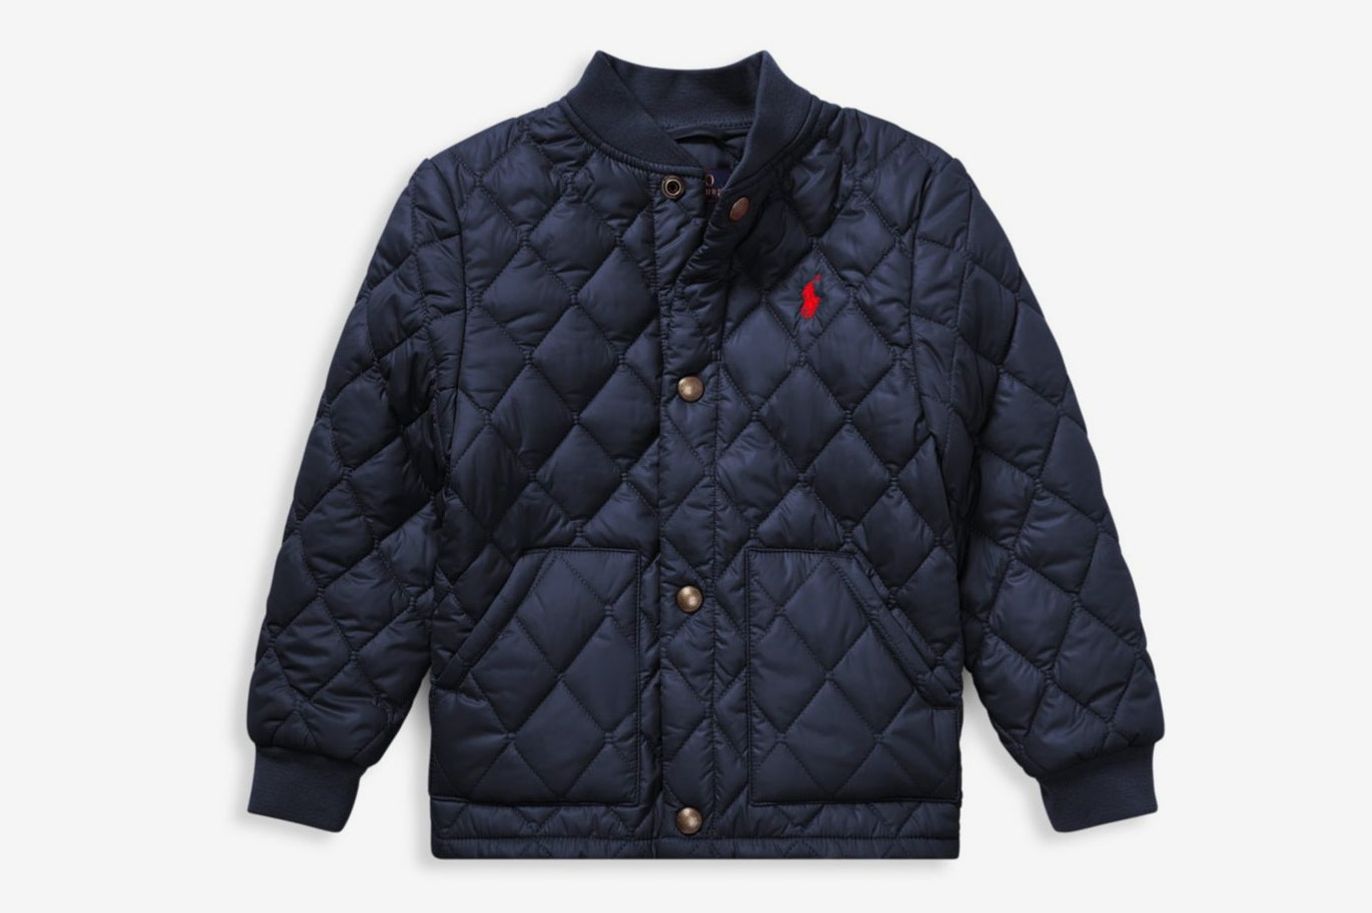 Ralph Lauren Quilted Coats and Vests for Kids Sale 2018 | The Strategist